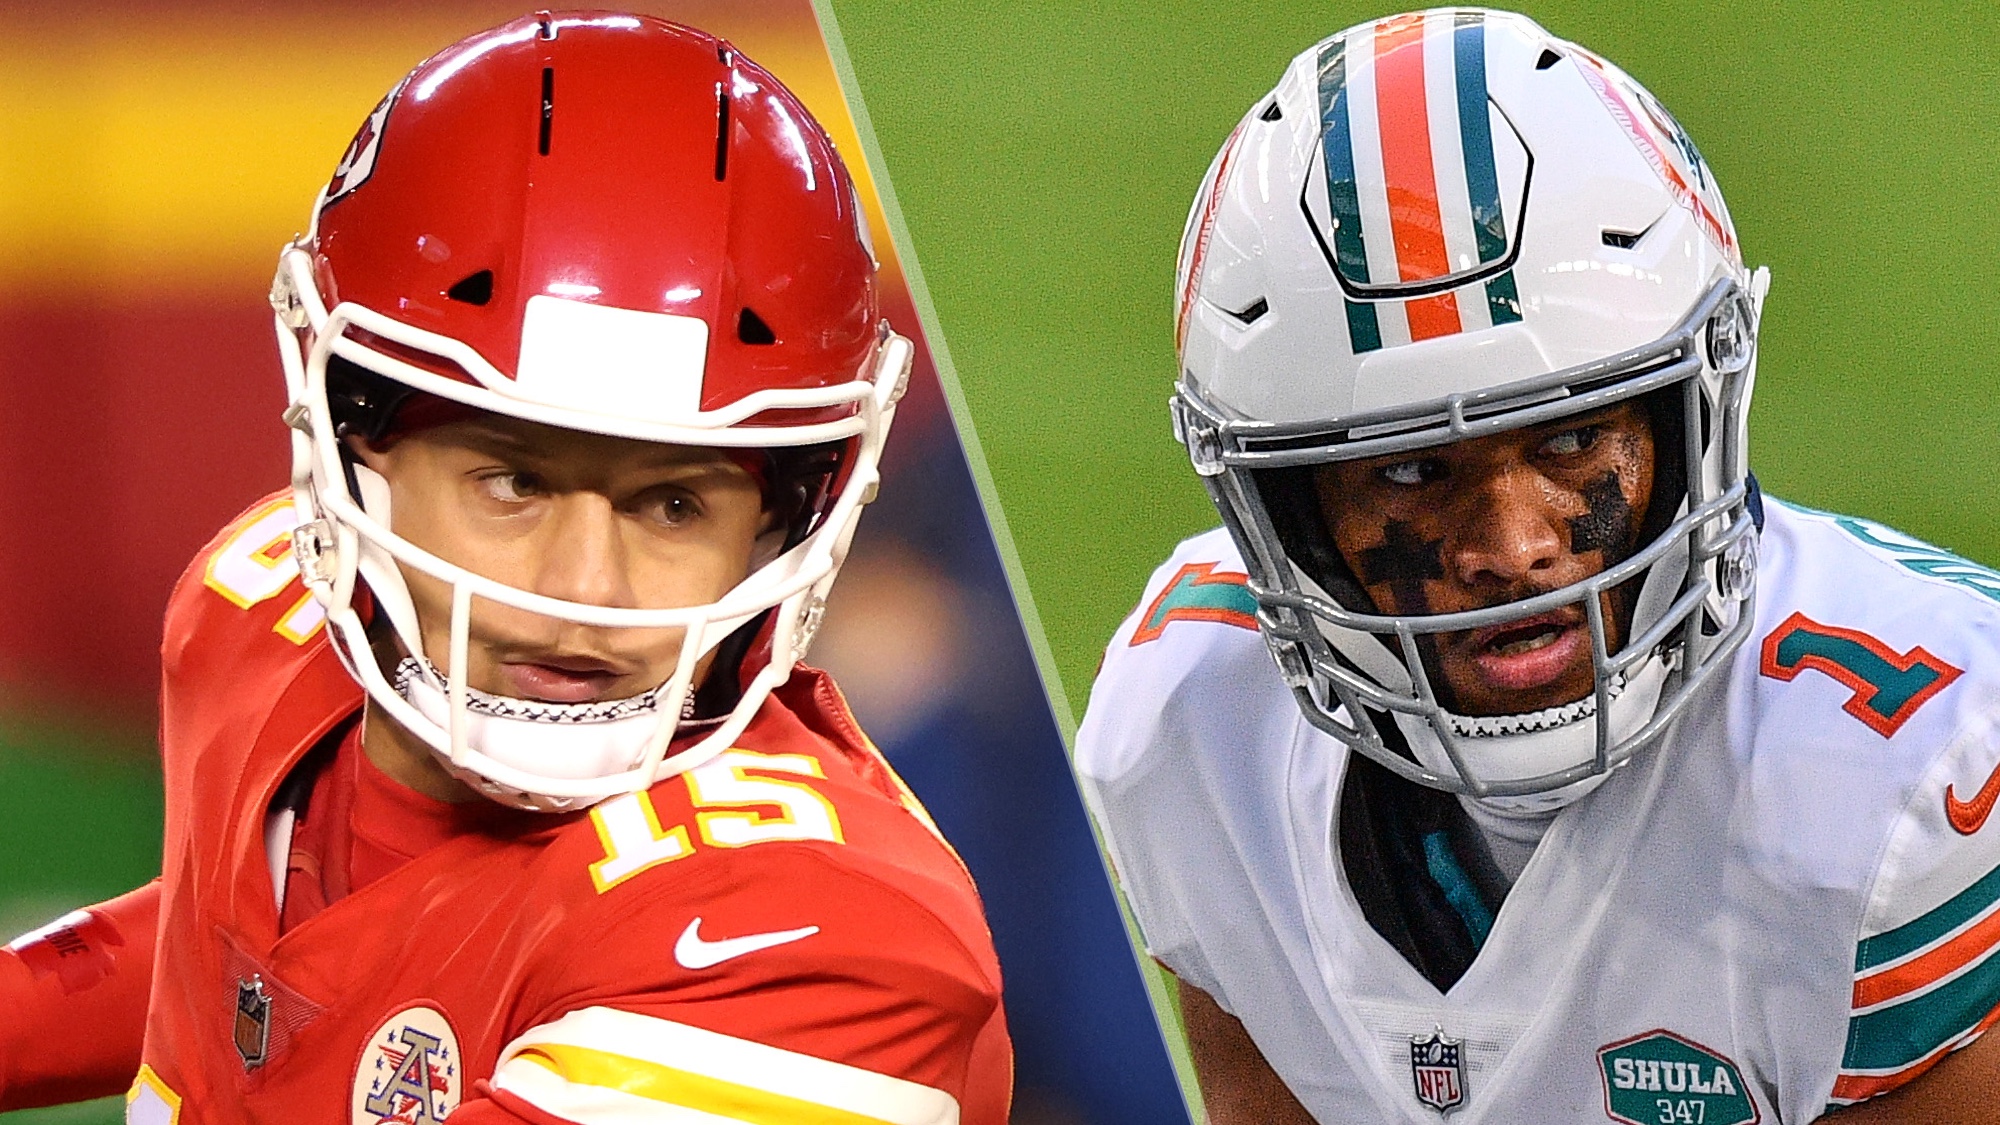 Chiefs vs Dolphins live stream: How to watch NFL week 14 game online | Tom's Guide